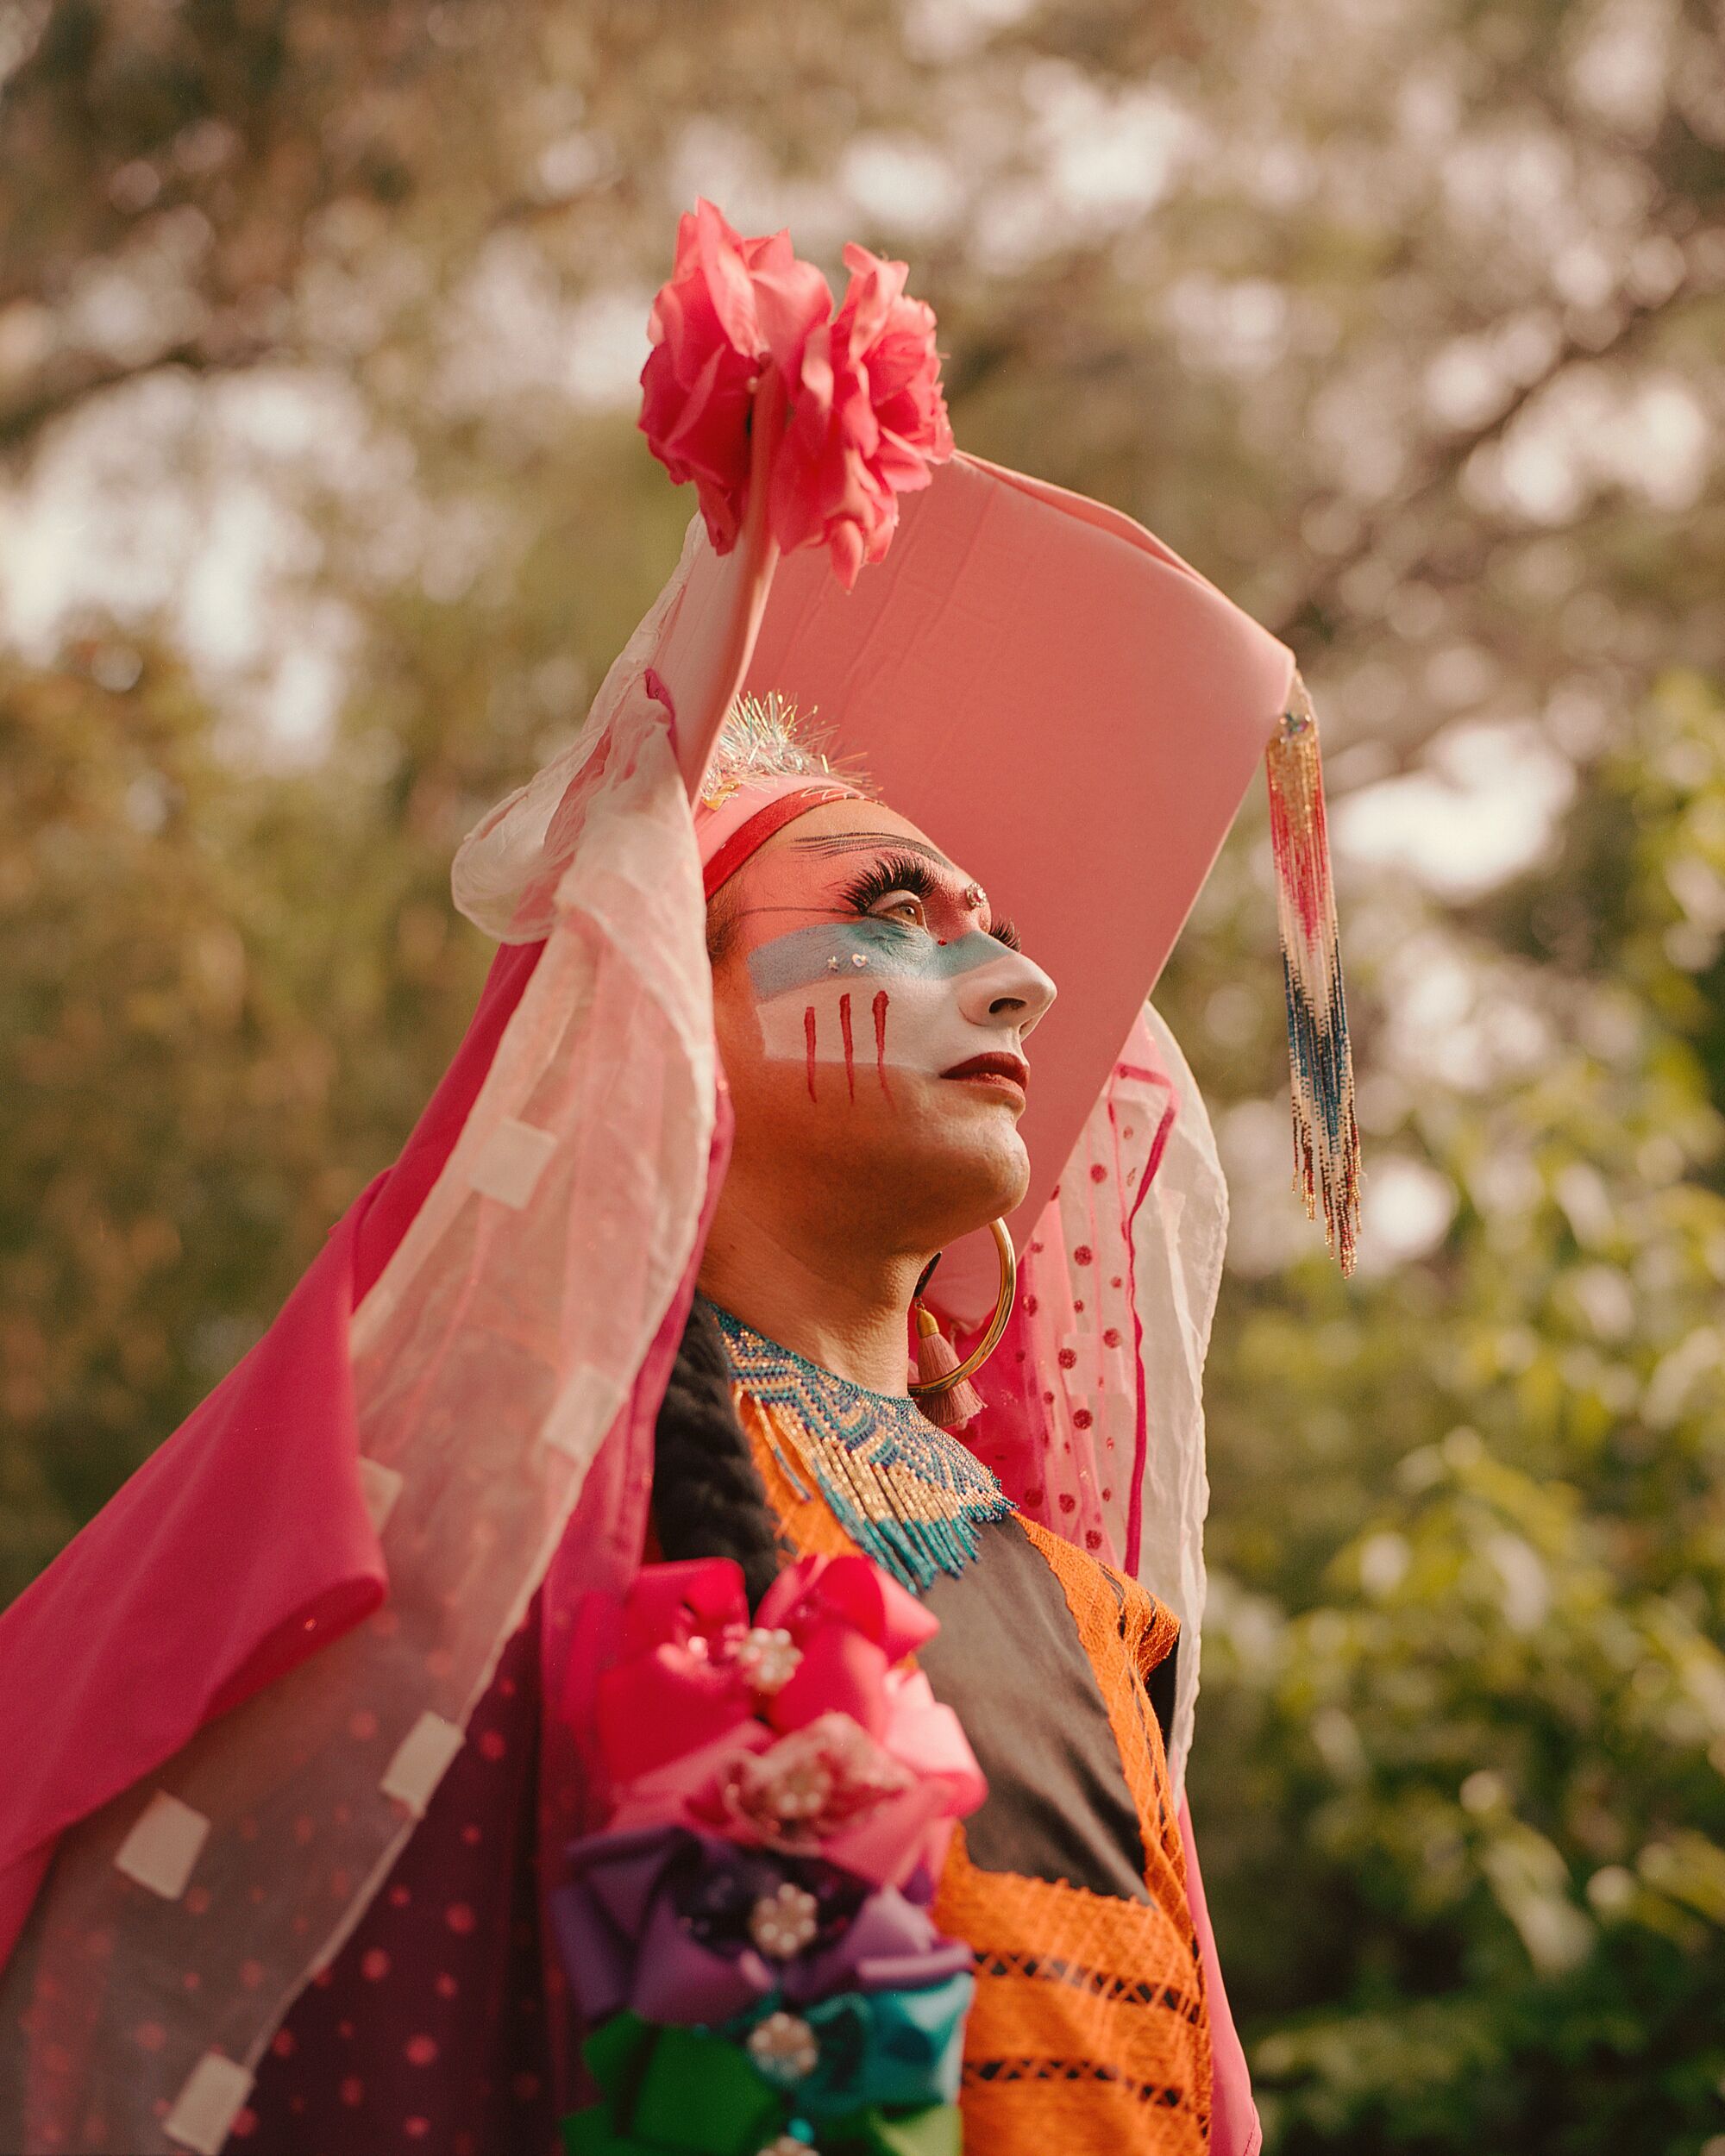 A drag nun in a peach colored dress with a colorful face standing outdoors looking up.